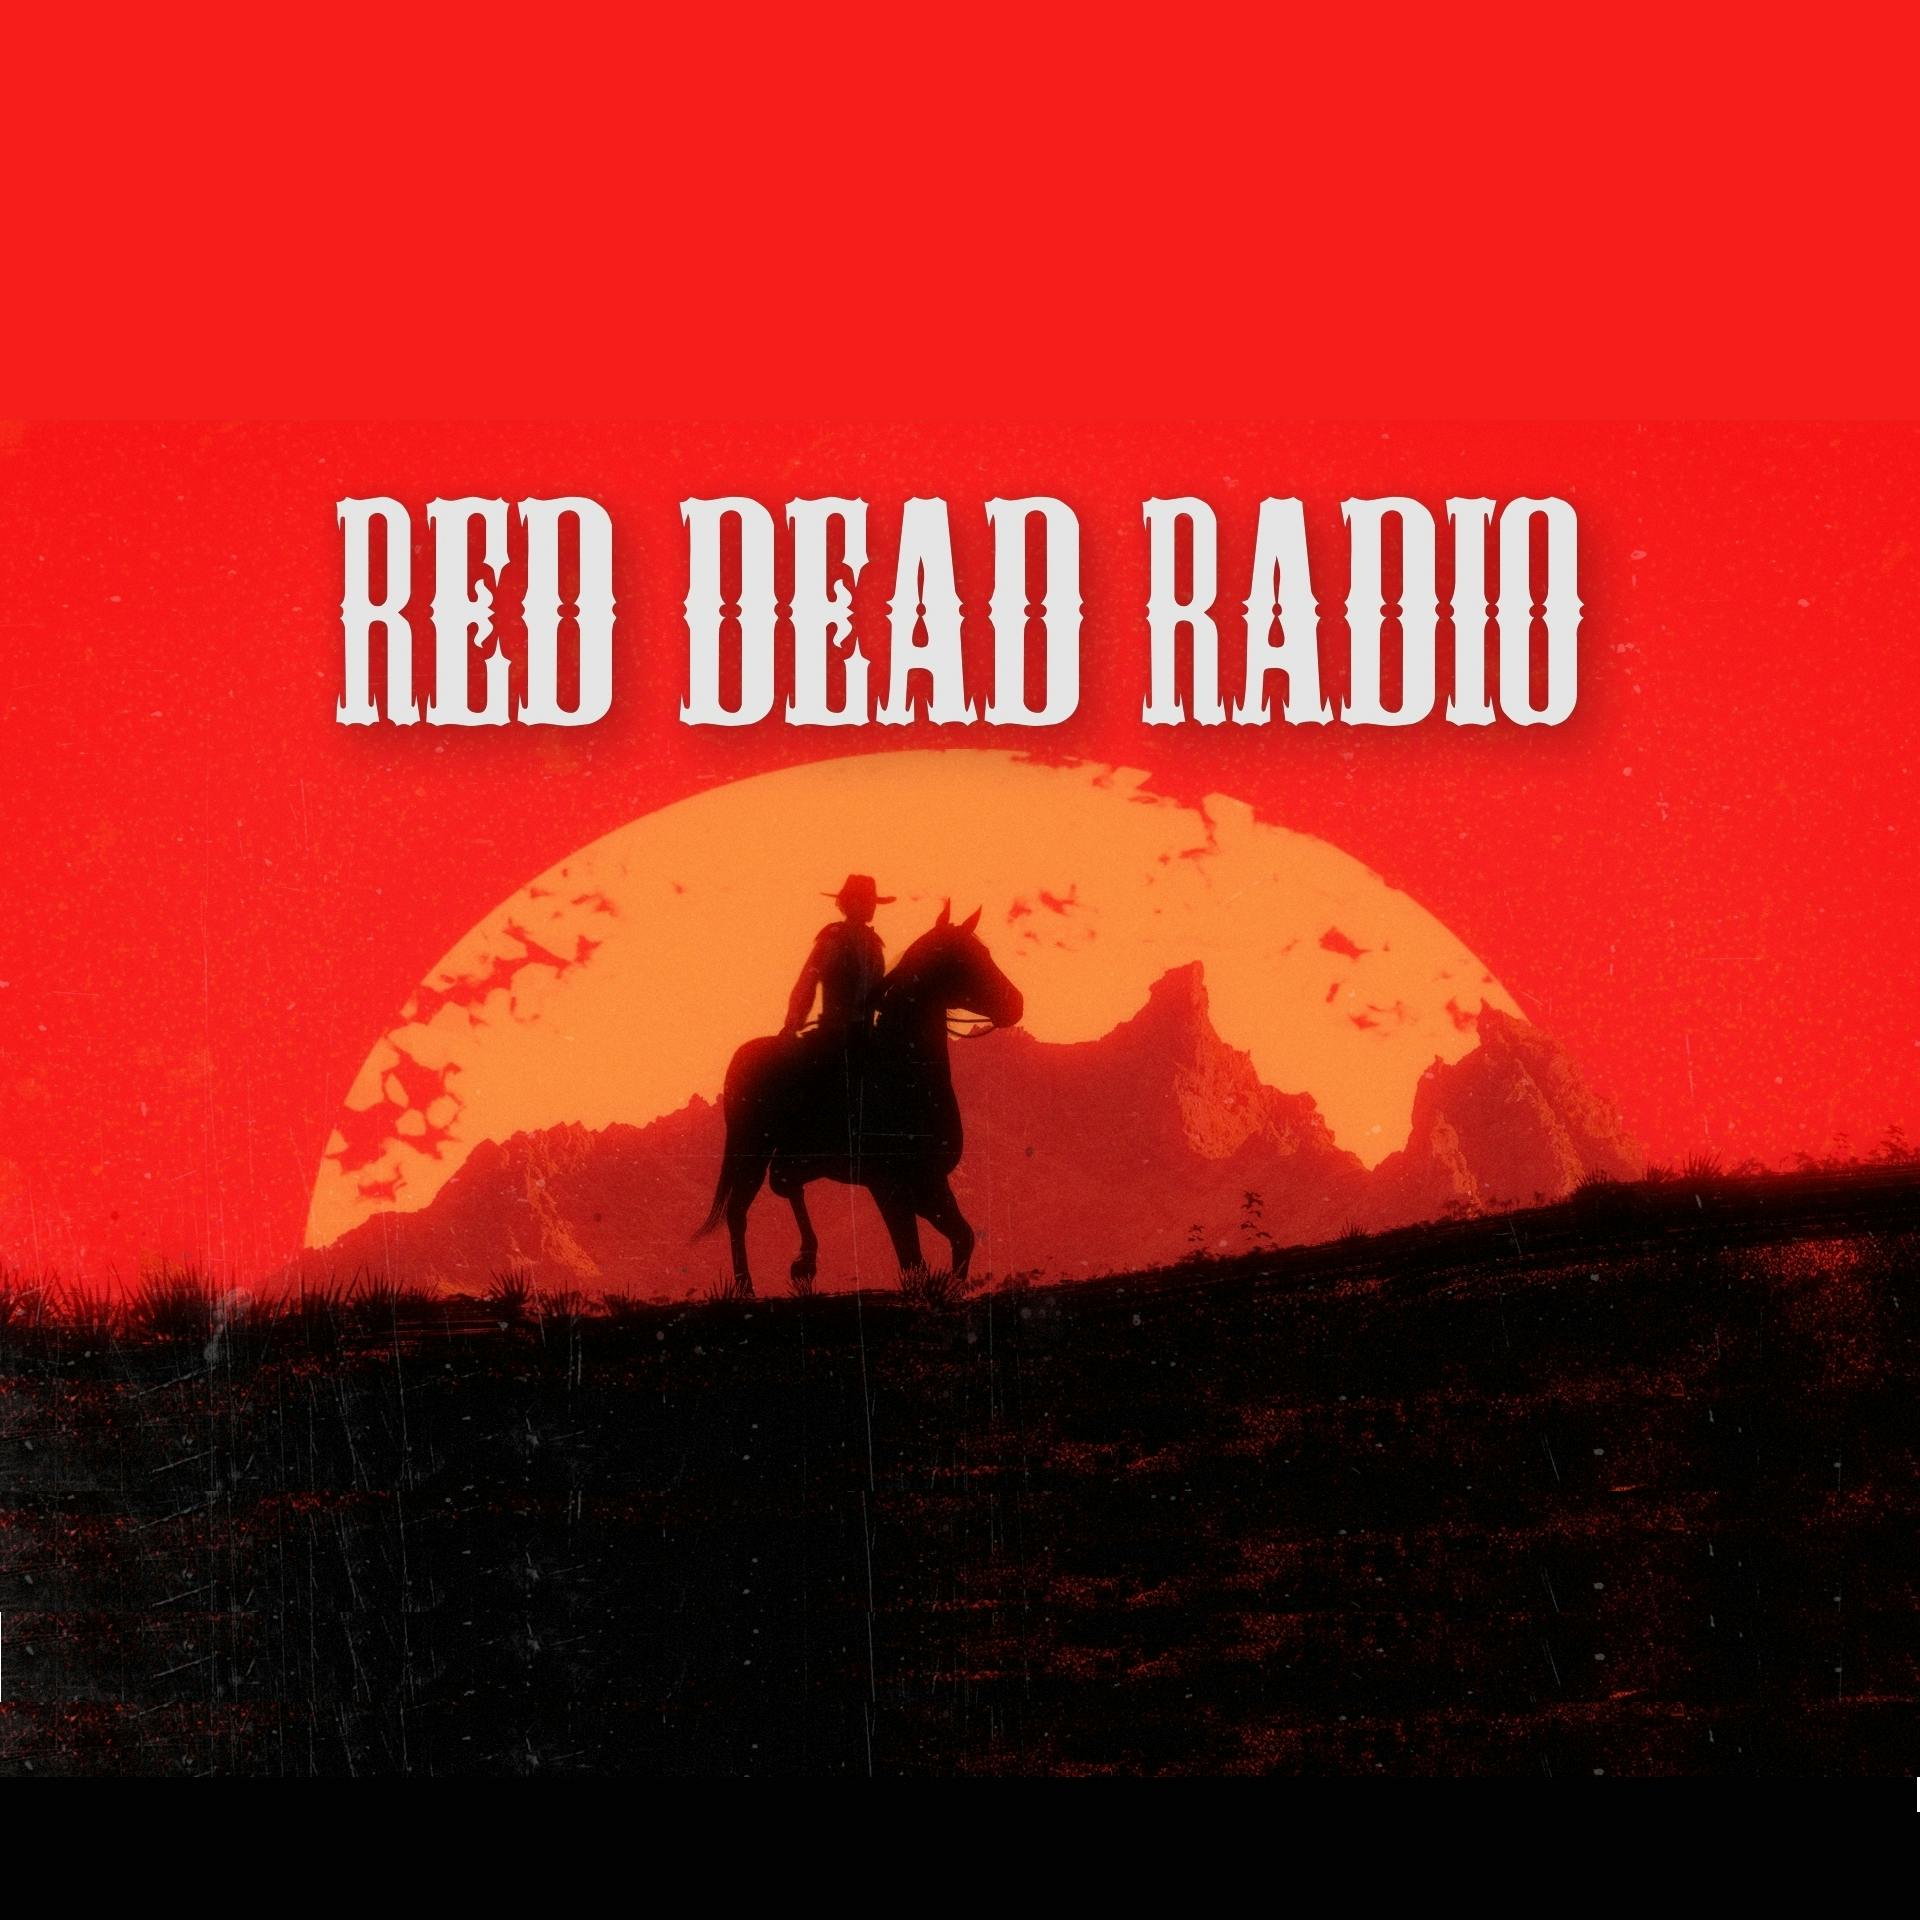 Red Dead Redemption 2: 2018 Game of the Year? - Red Dead Radio Ep. 35